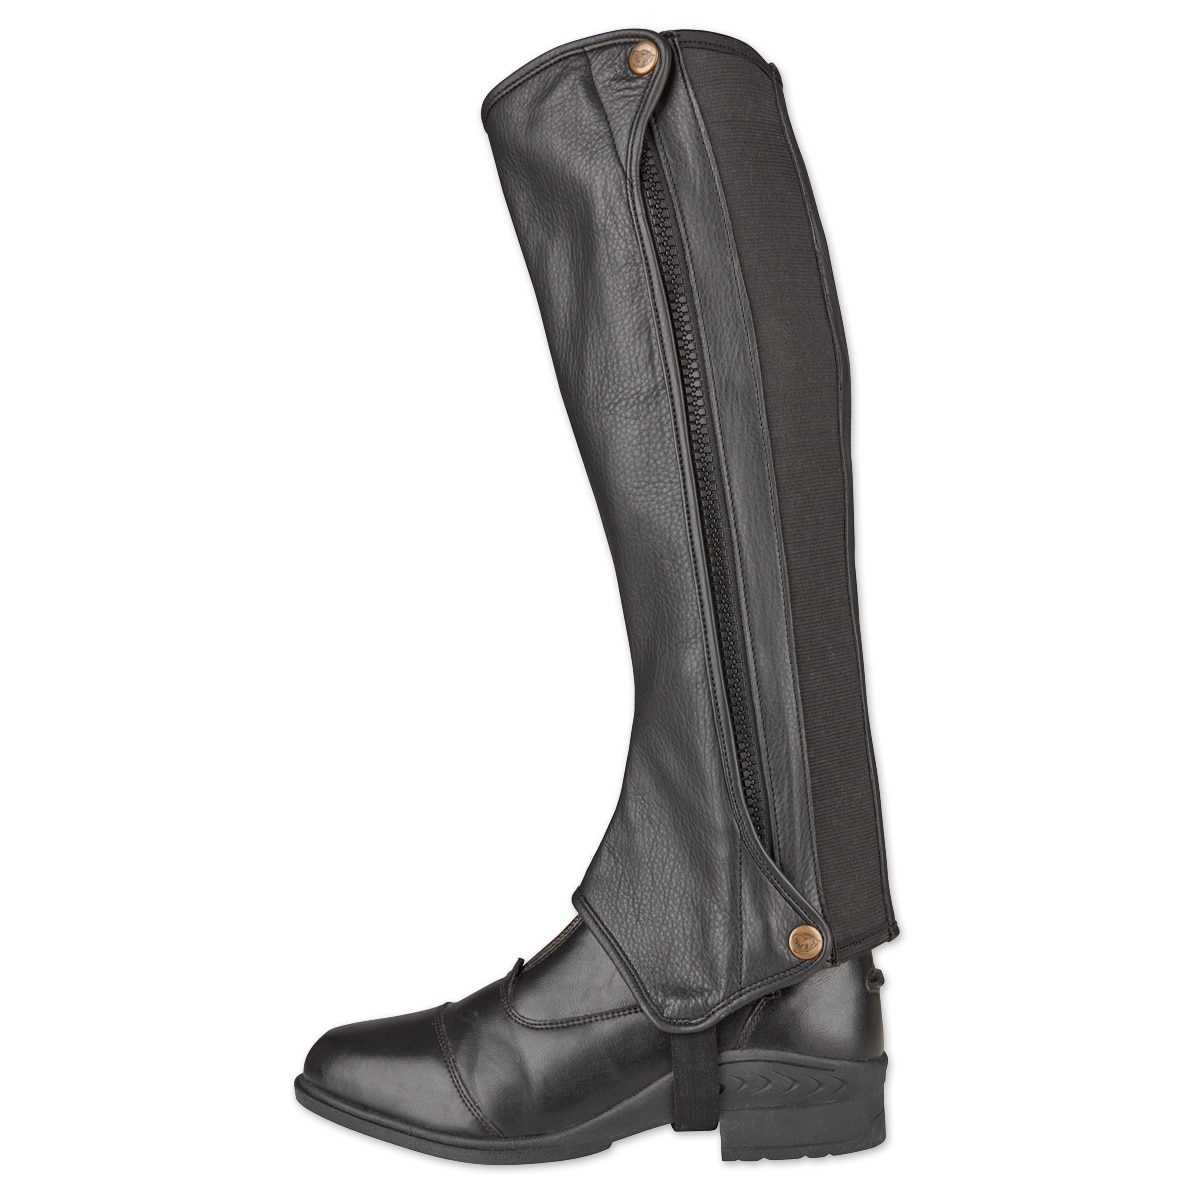 MEDIUM SMALL LARGE & X-LARG HALF CHAPS HORSE RIDING SYNTHECTIC LEATHER BLACK 